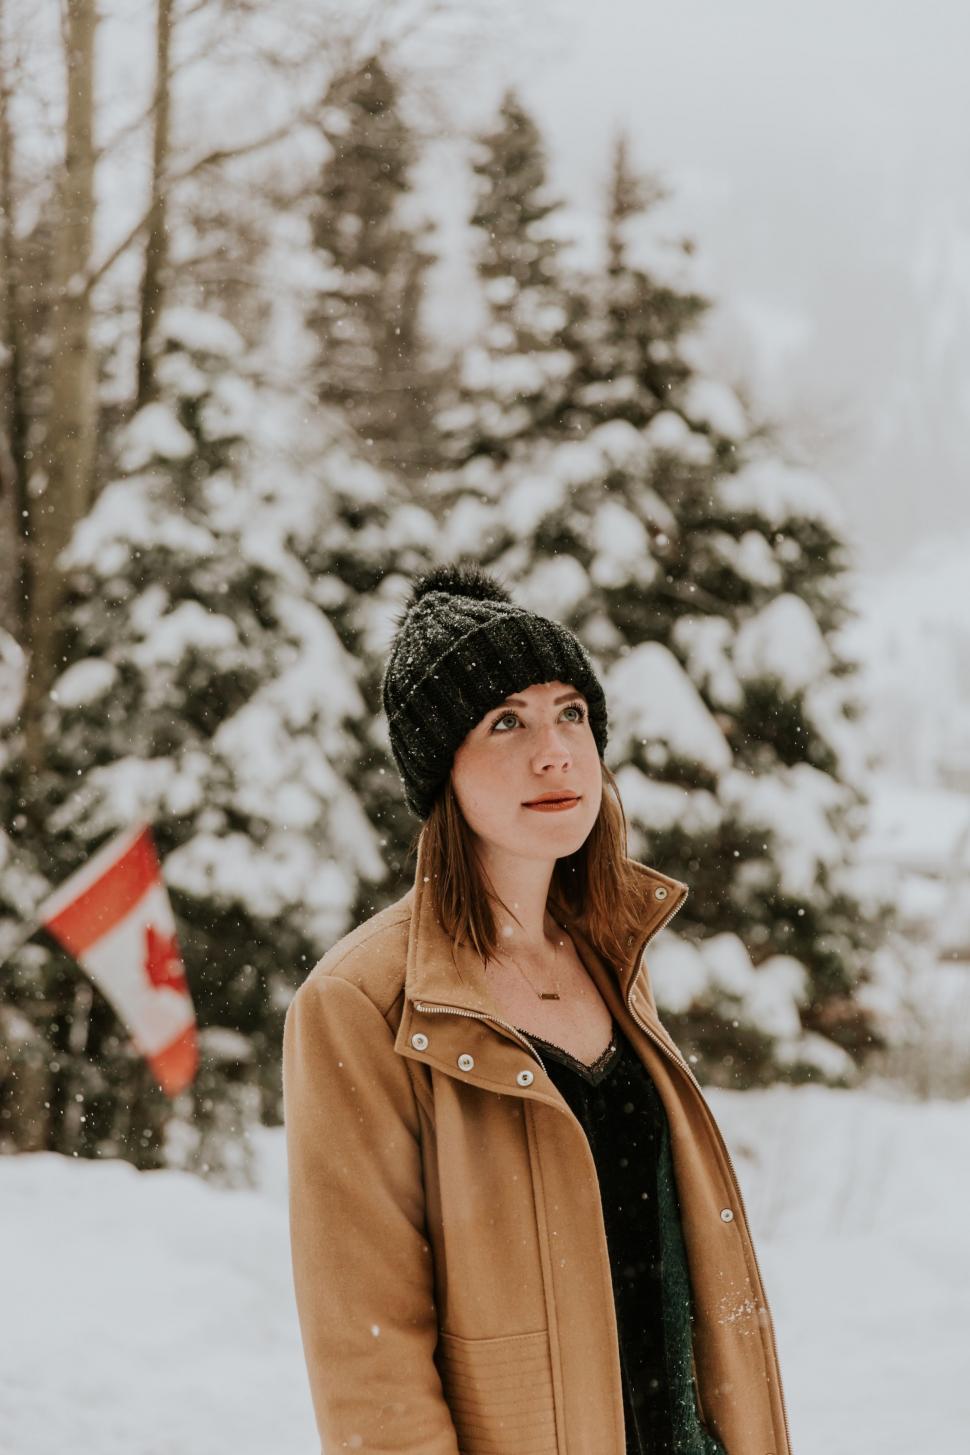 Free Image of Woman Standing in Snow With Canadian Flag in Background 